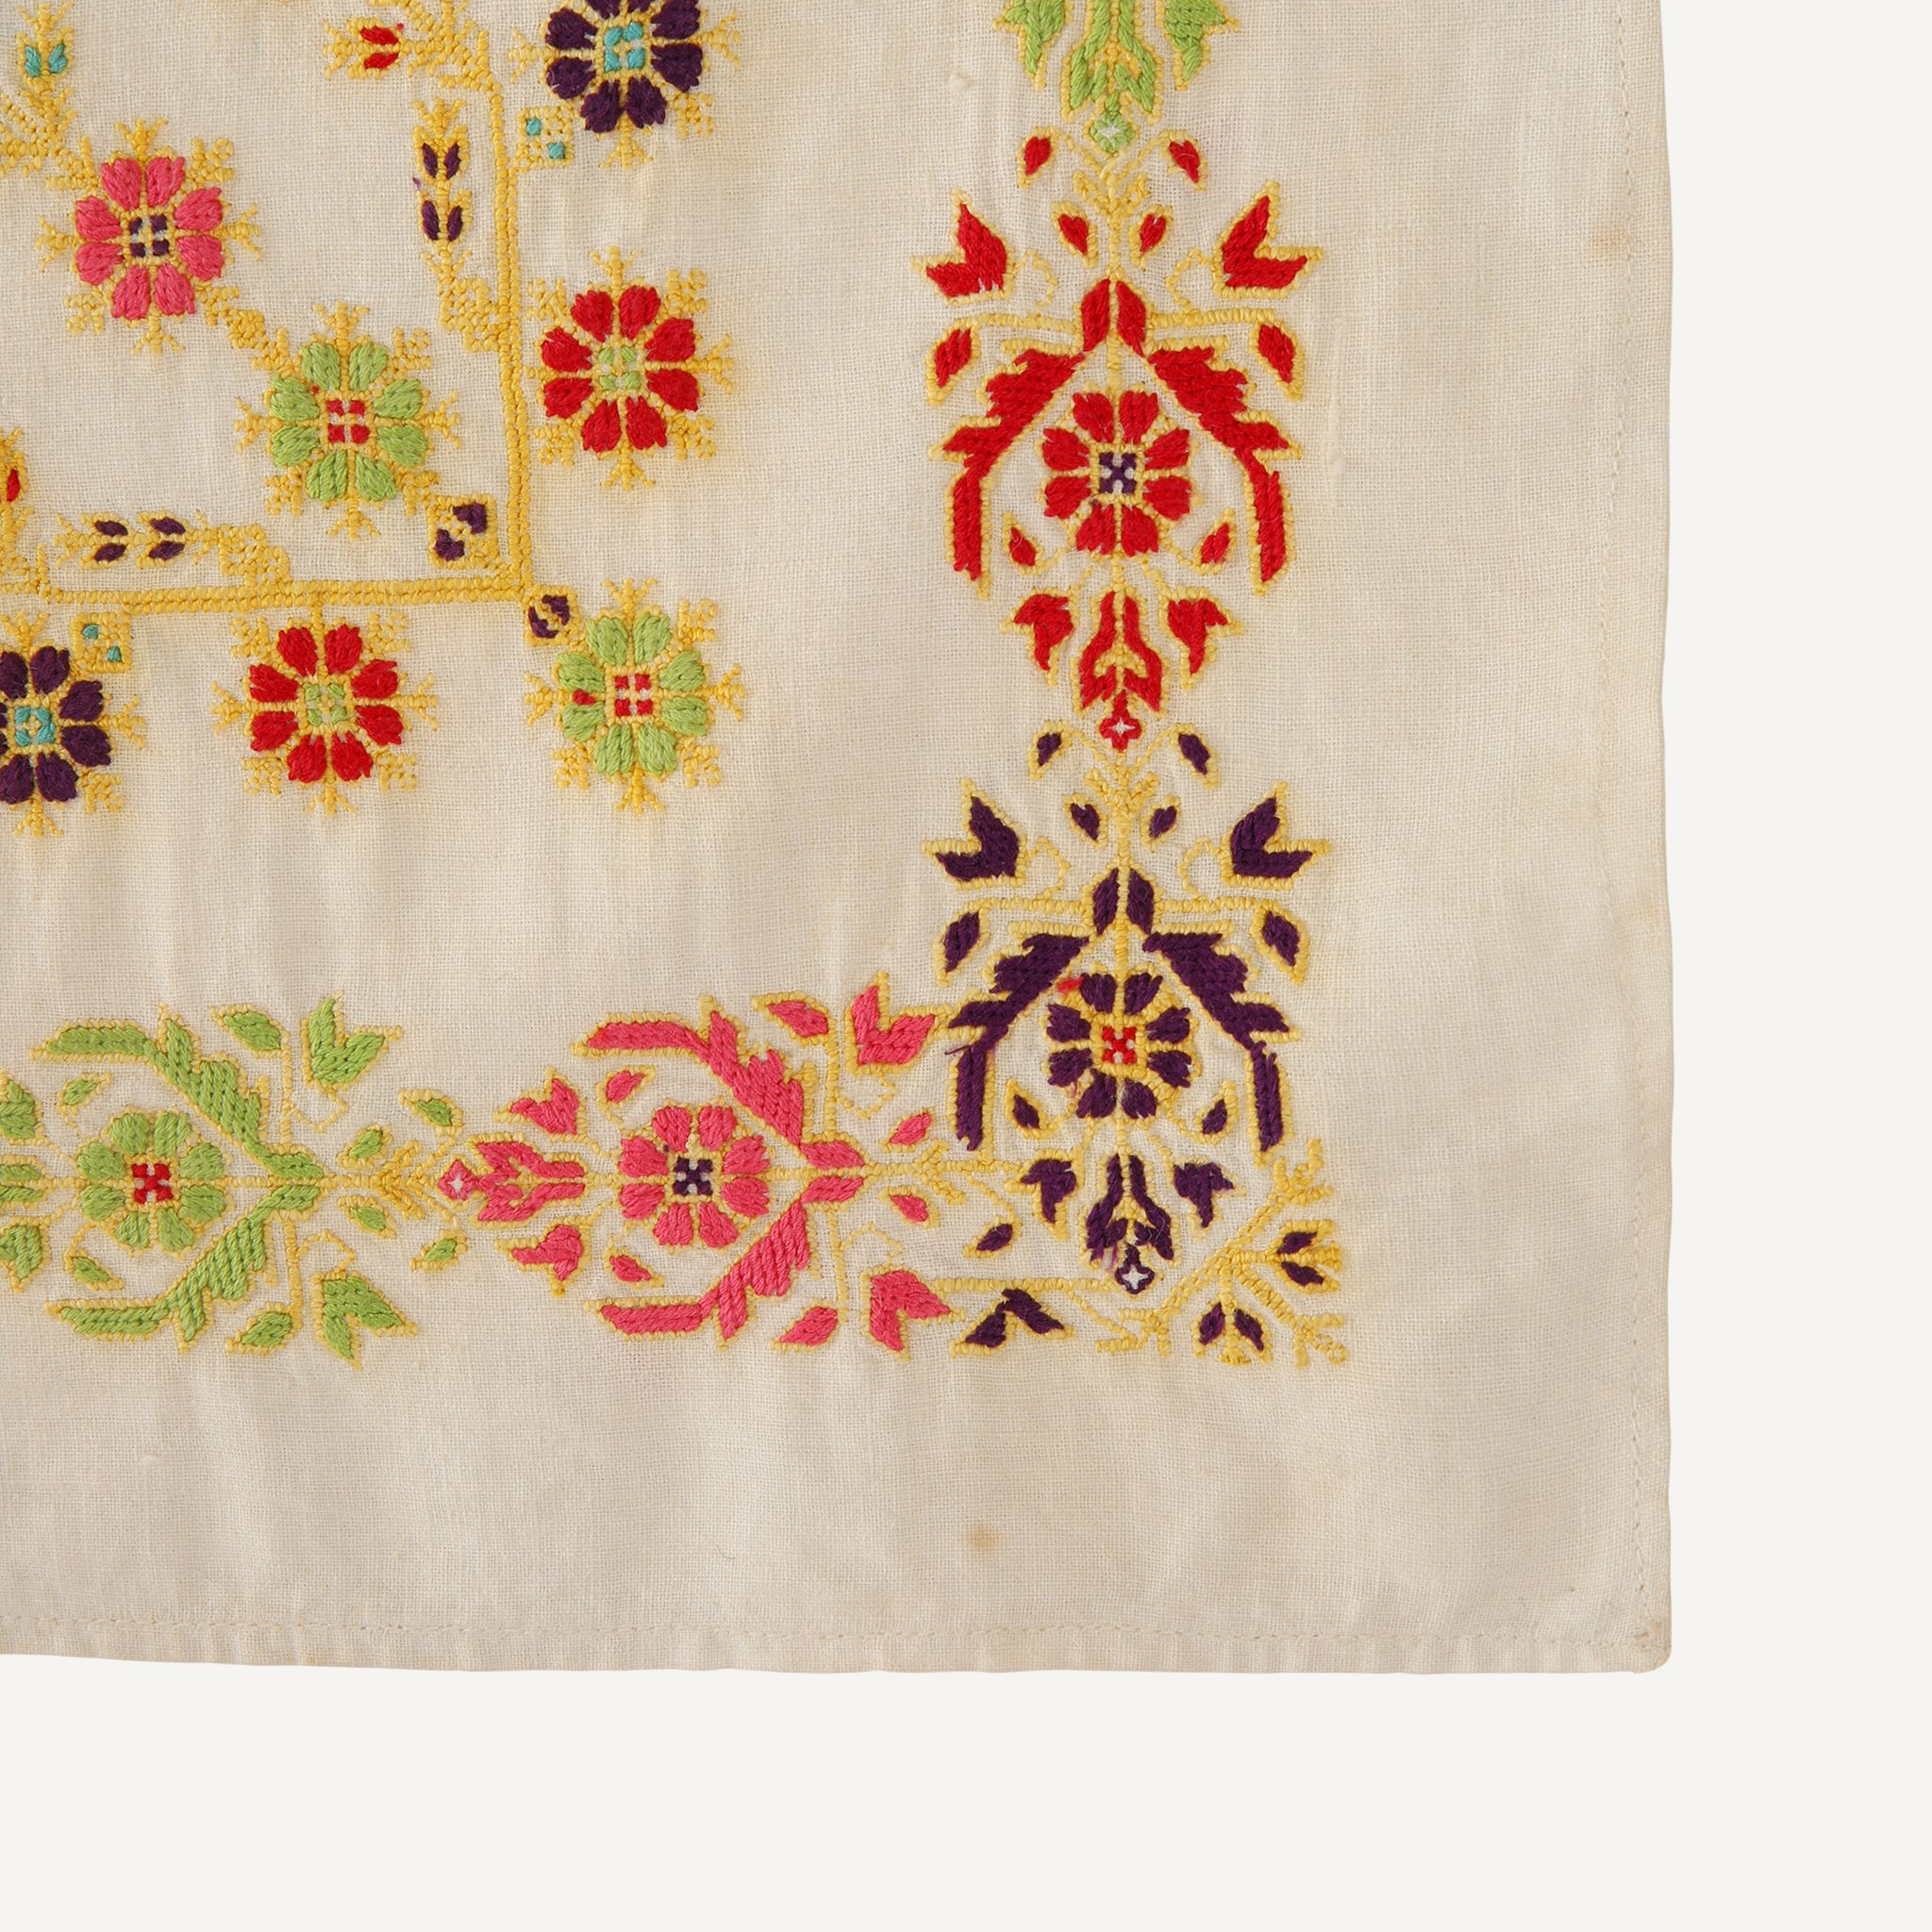 ANTIQUE EMBROIDERED TEXTILE